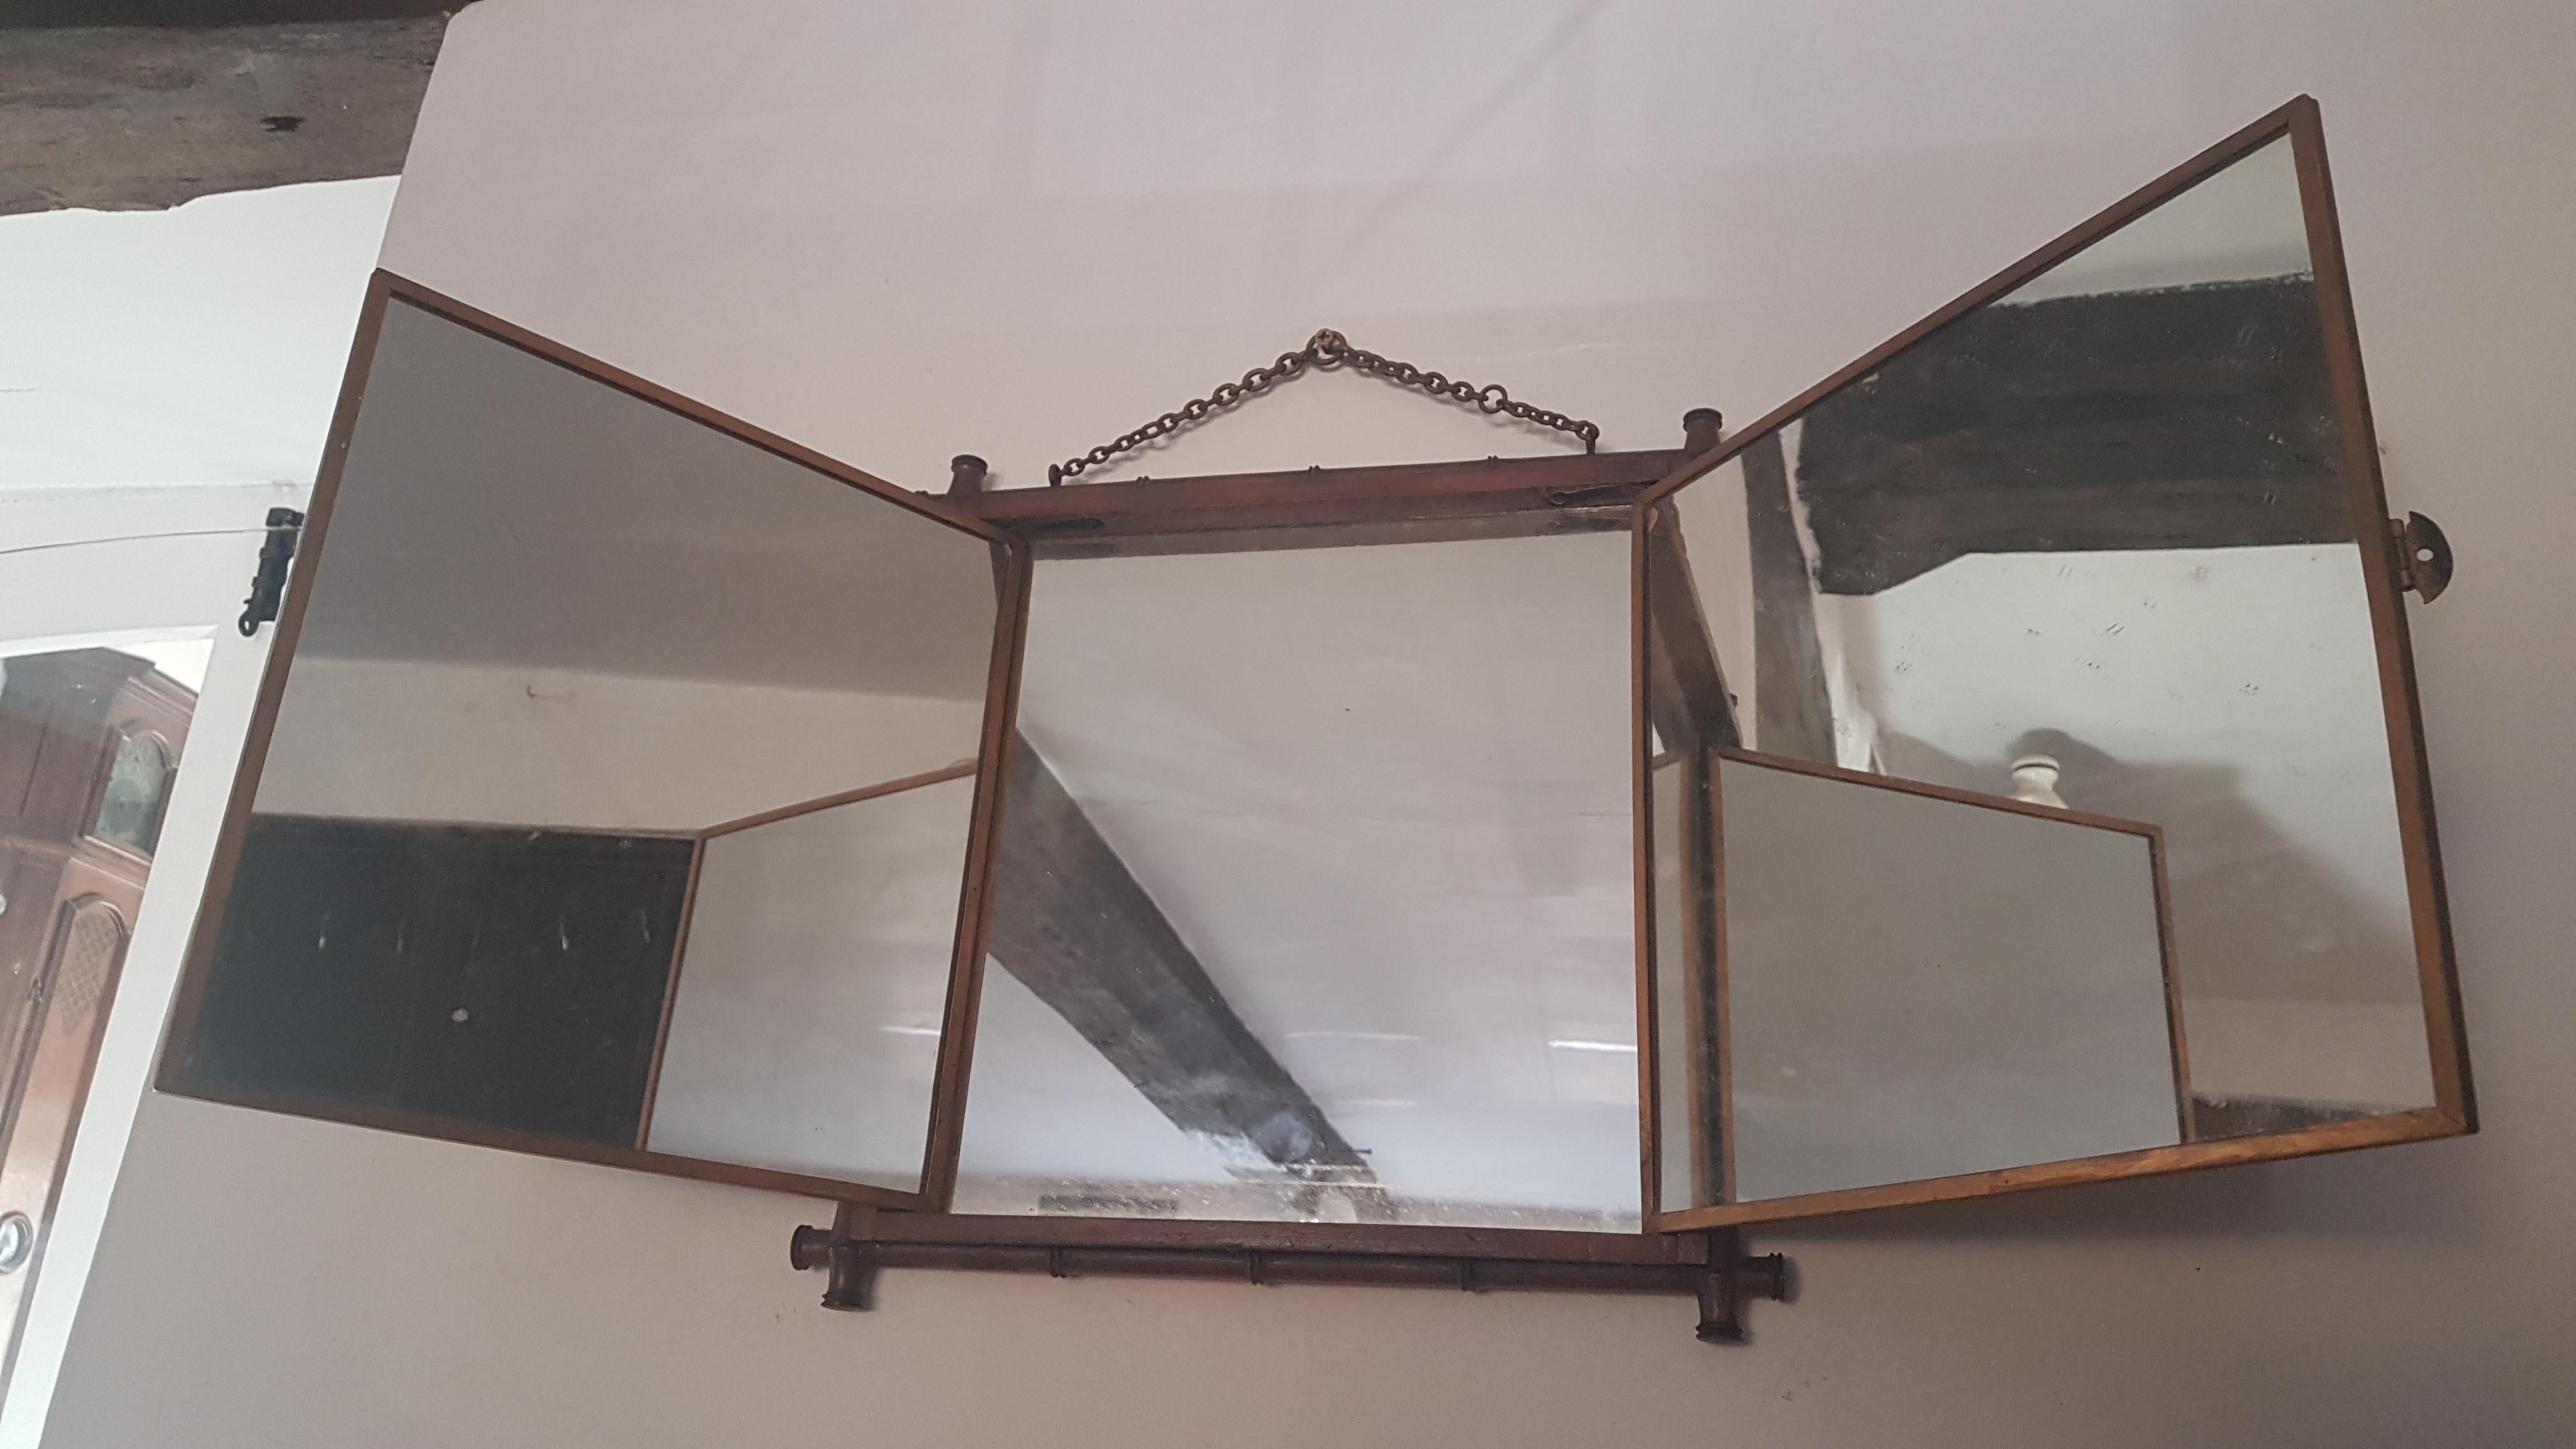 A tryptic mirror by the renowned Miroir Brot company in France. Miroir Brot invented, designed & patented this form of tryptic mechanism which at the time was very innovative. The mirror is contained within a decorative faux bamboo frame which is in